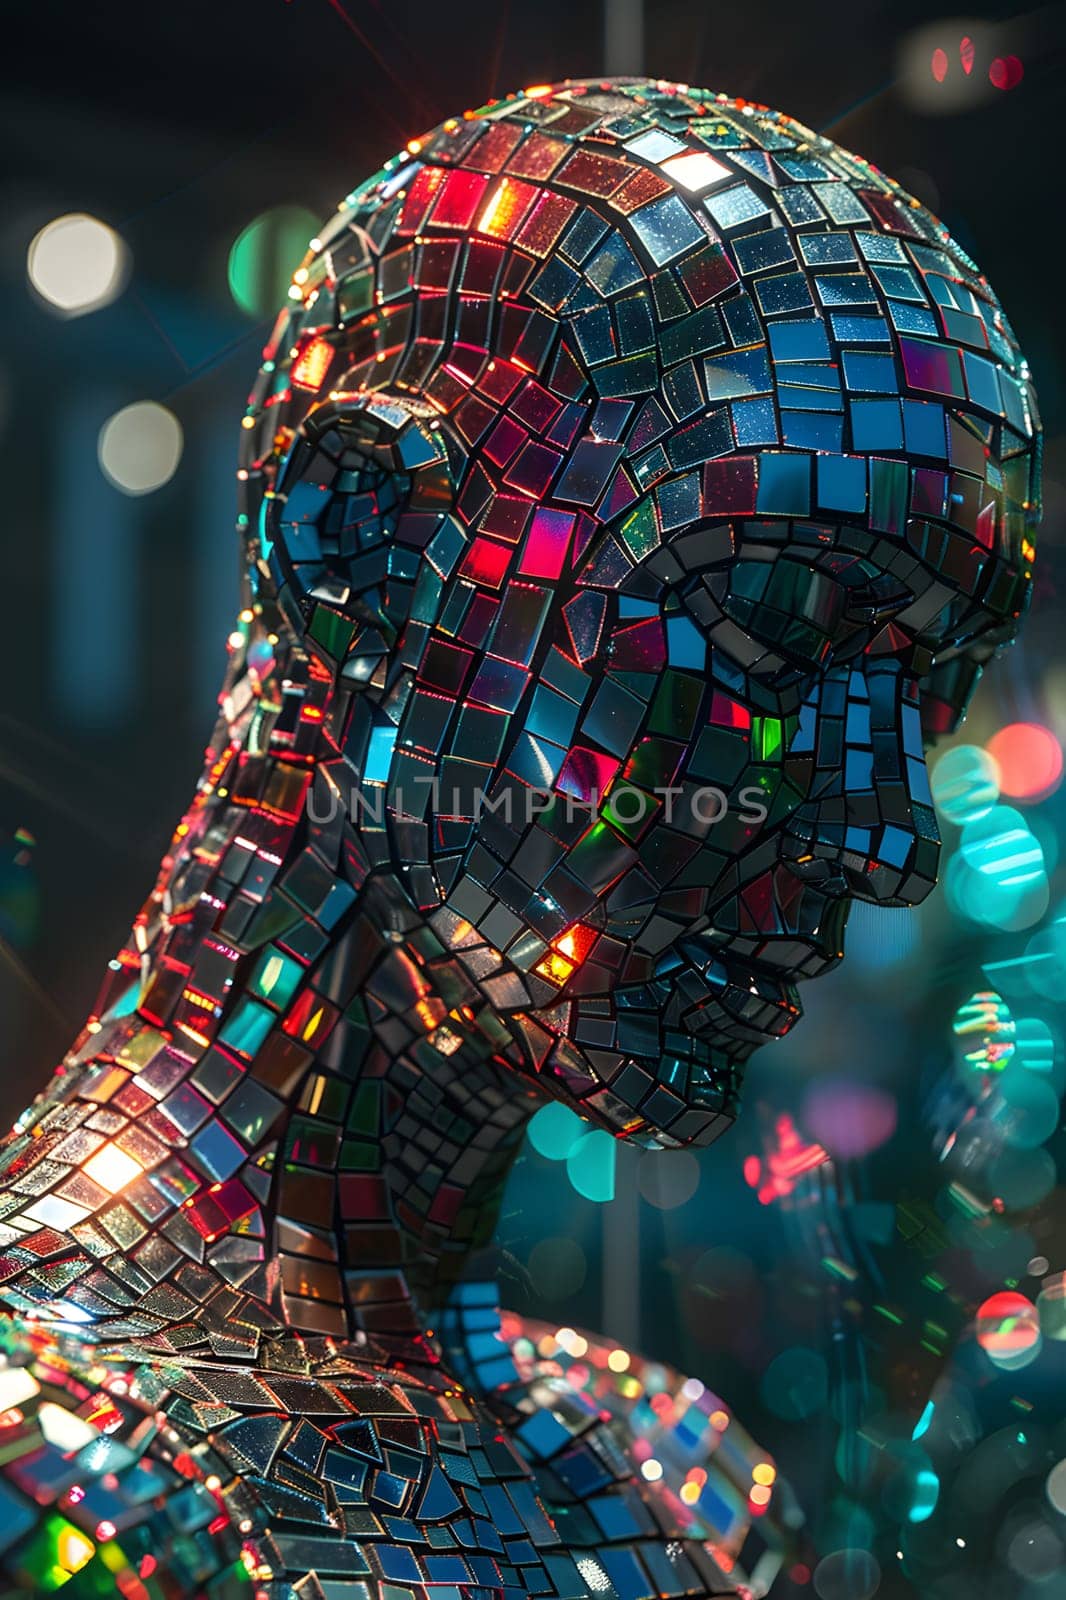 A stunning mosaic sculpture of a persons head and torso, featuring intricate patterns in electric blue glass. An elegant fashion accessory for any art lover